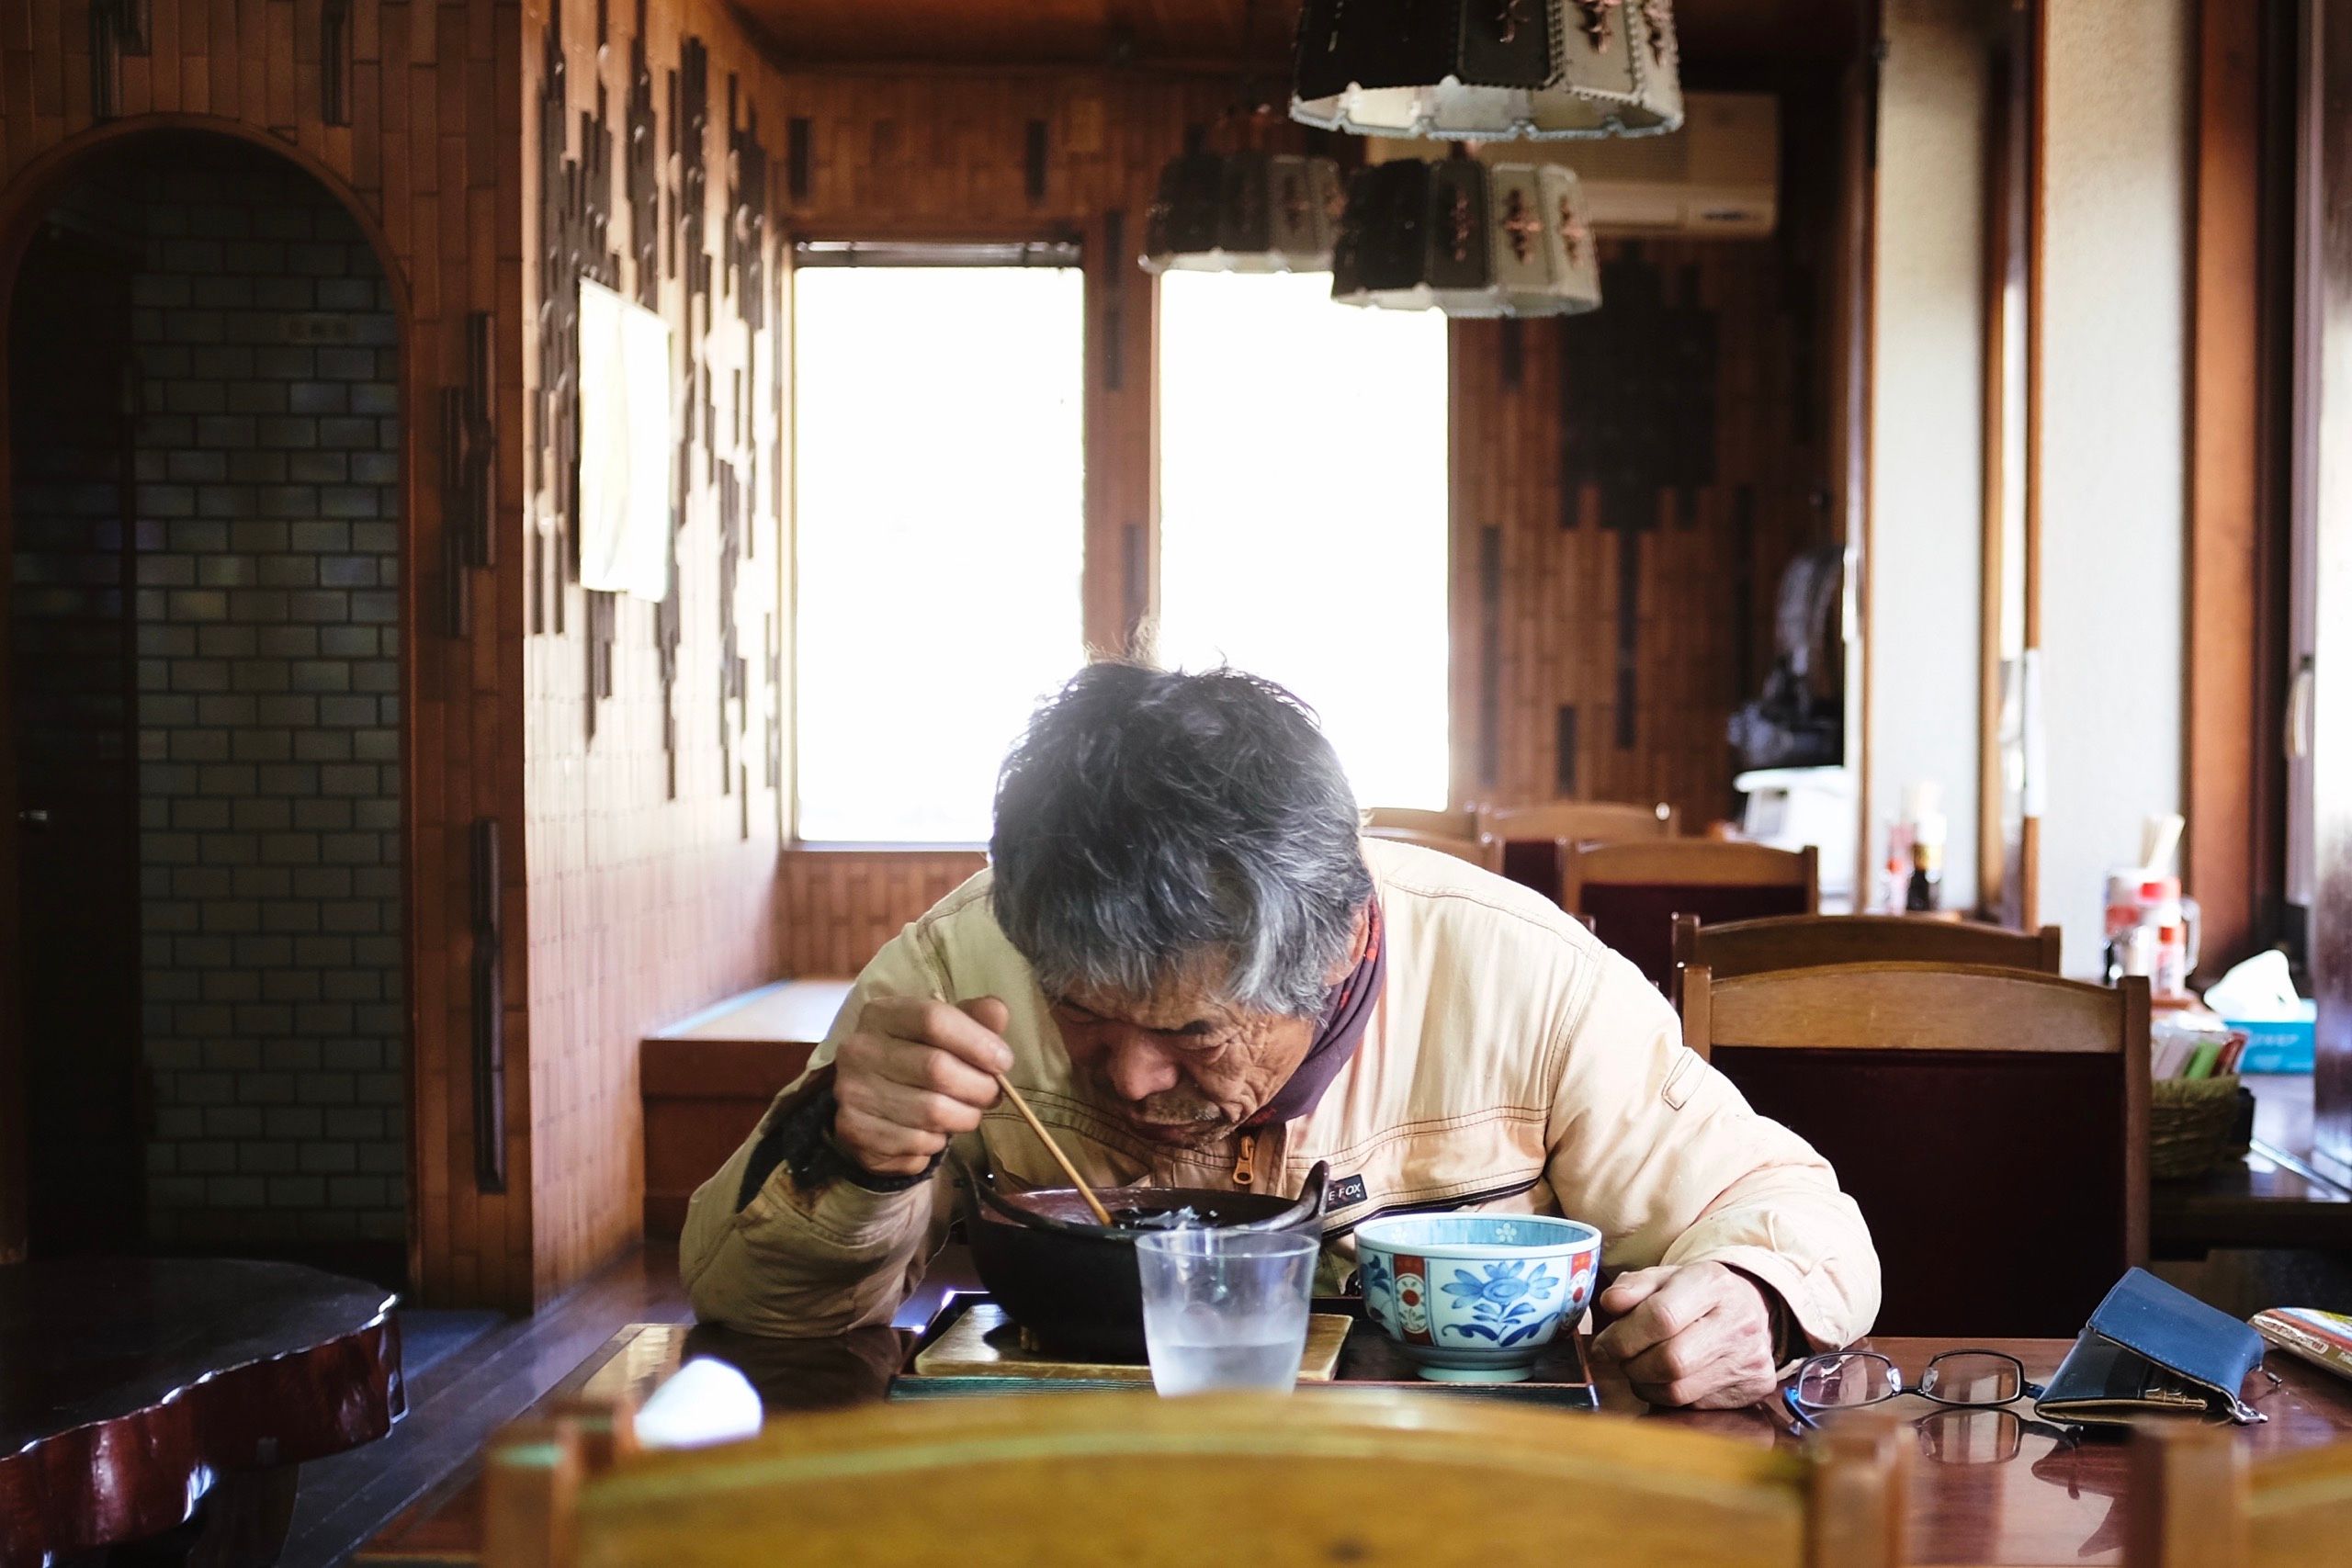 A man in workmen’s overalls eats a bowl of the noodles.